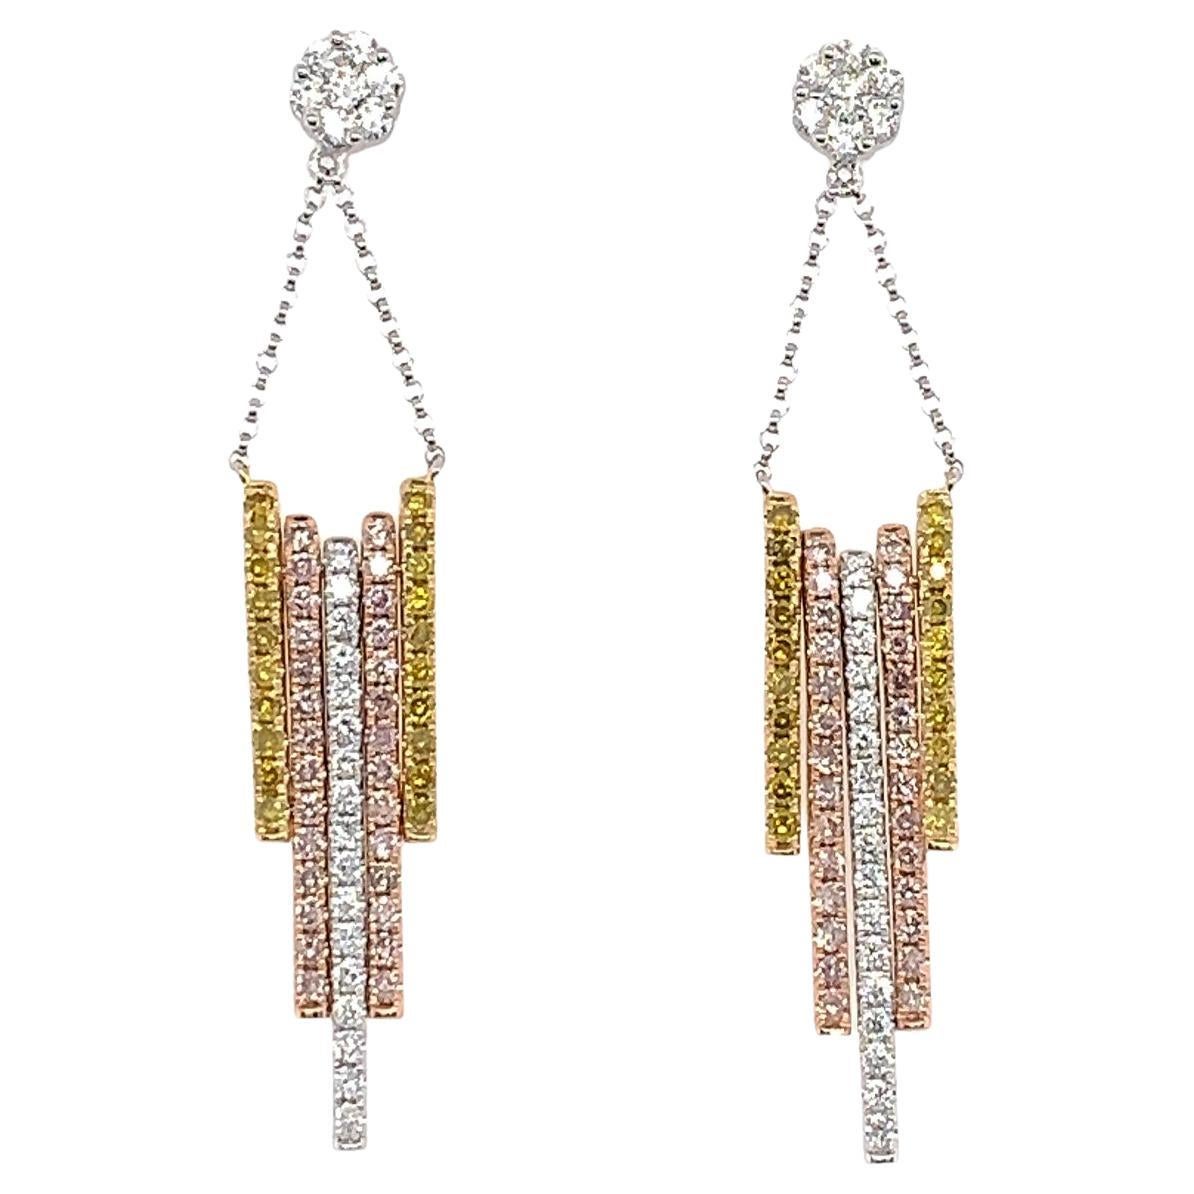 NWT $19, 842 18KT Magnificent Fancy Gold Diamond Pink Diamond Fringe Earrings For Sale